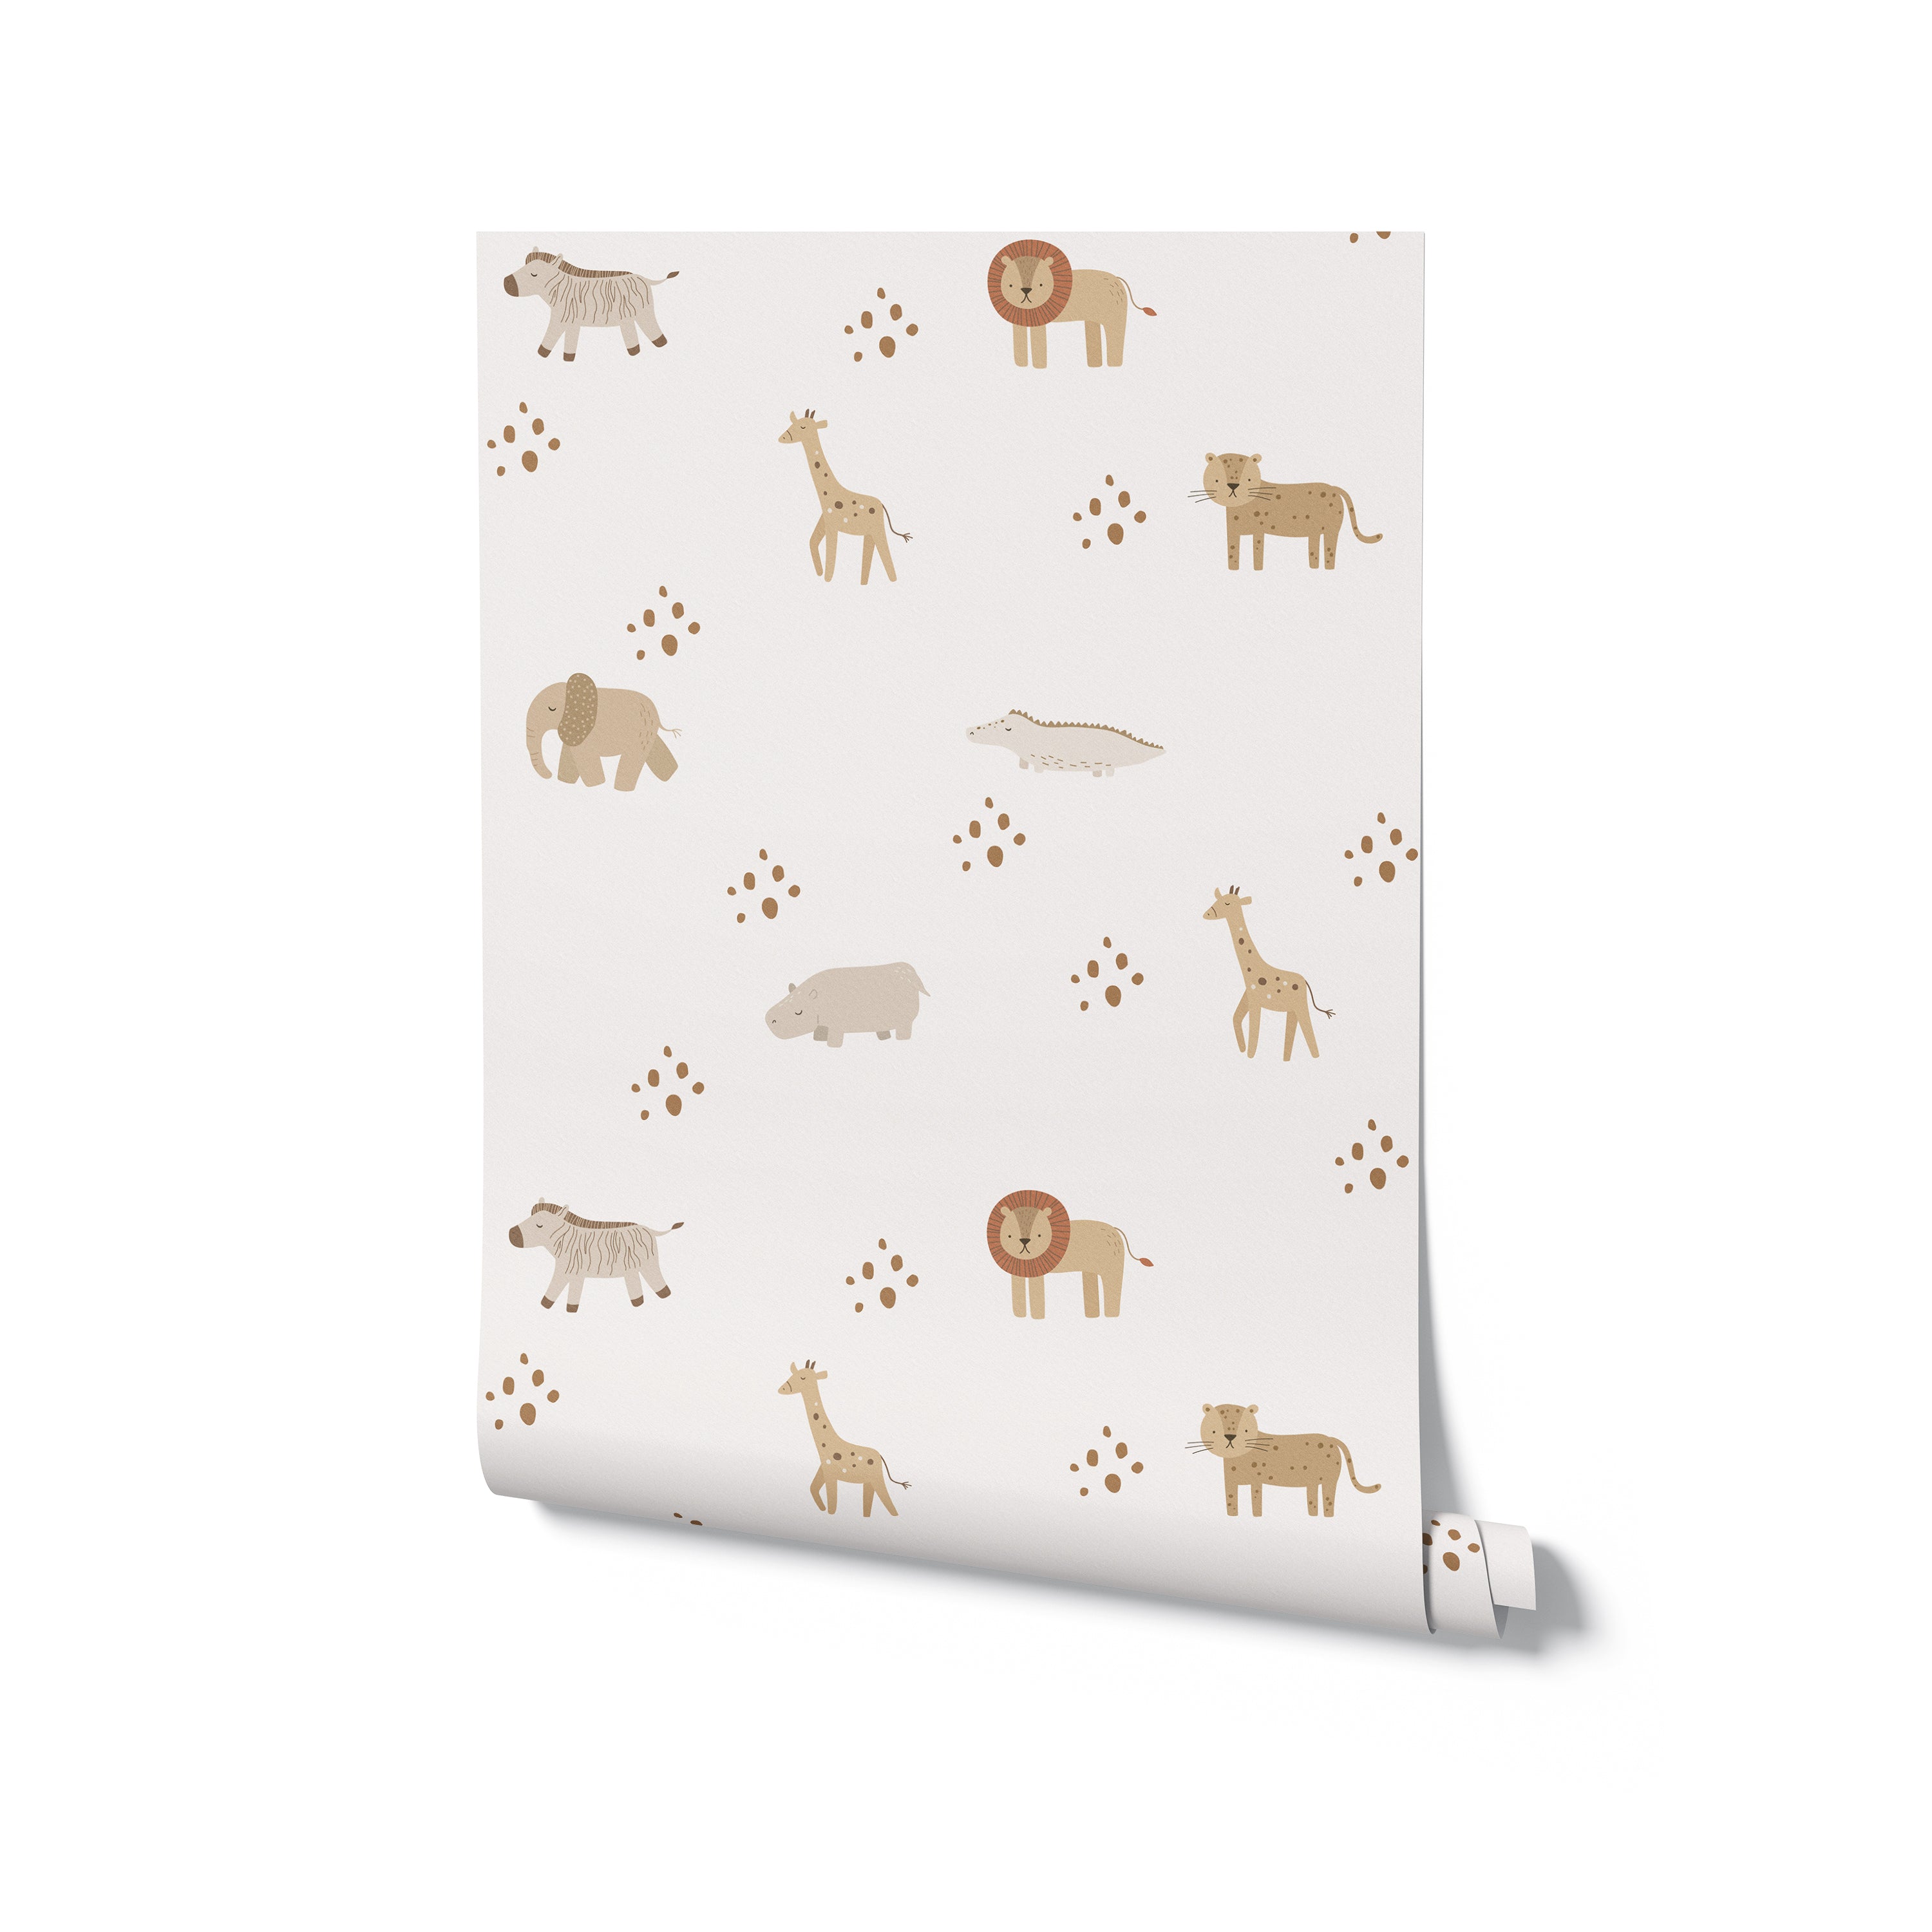 A roll of Safari Animals Kids Wallpaper showing a continuous pattern of adorable safari creatures and paw prints in neutral tones on an off-white background, offering a playful and kid-friendly design ideal for creating a charming nursery or playroom.